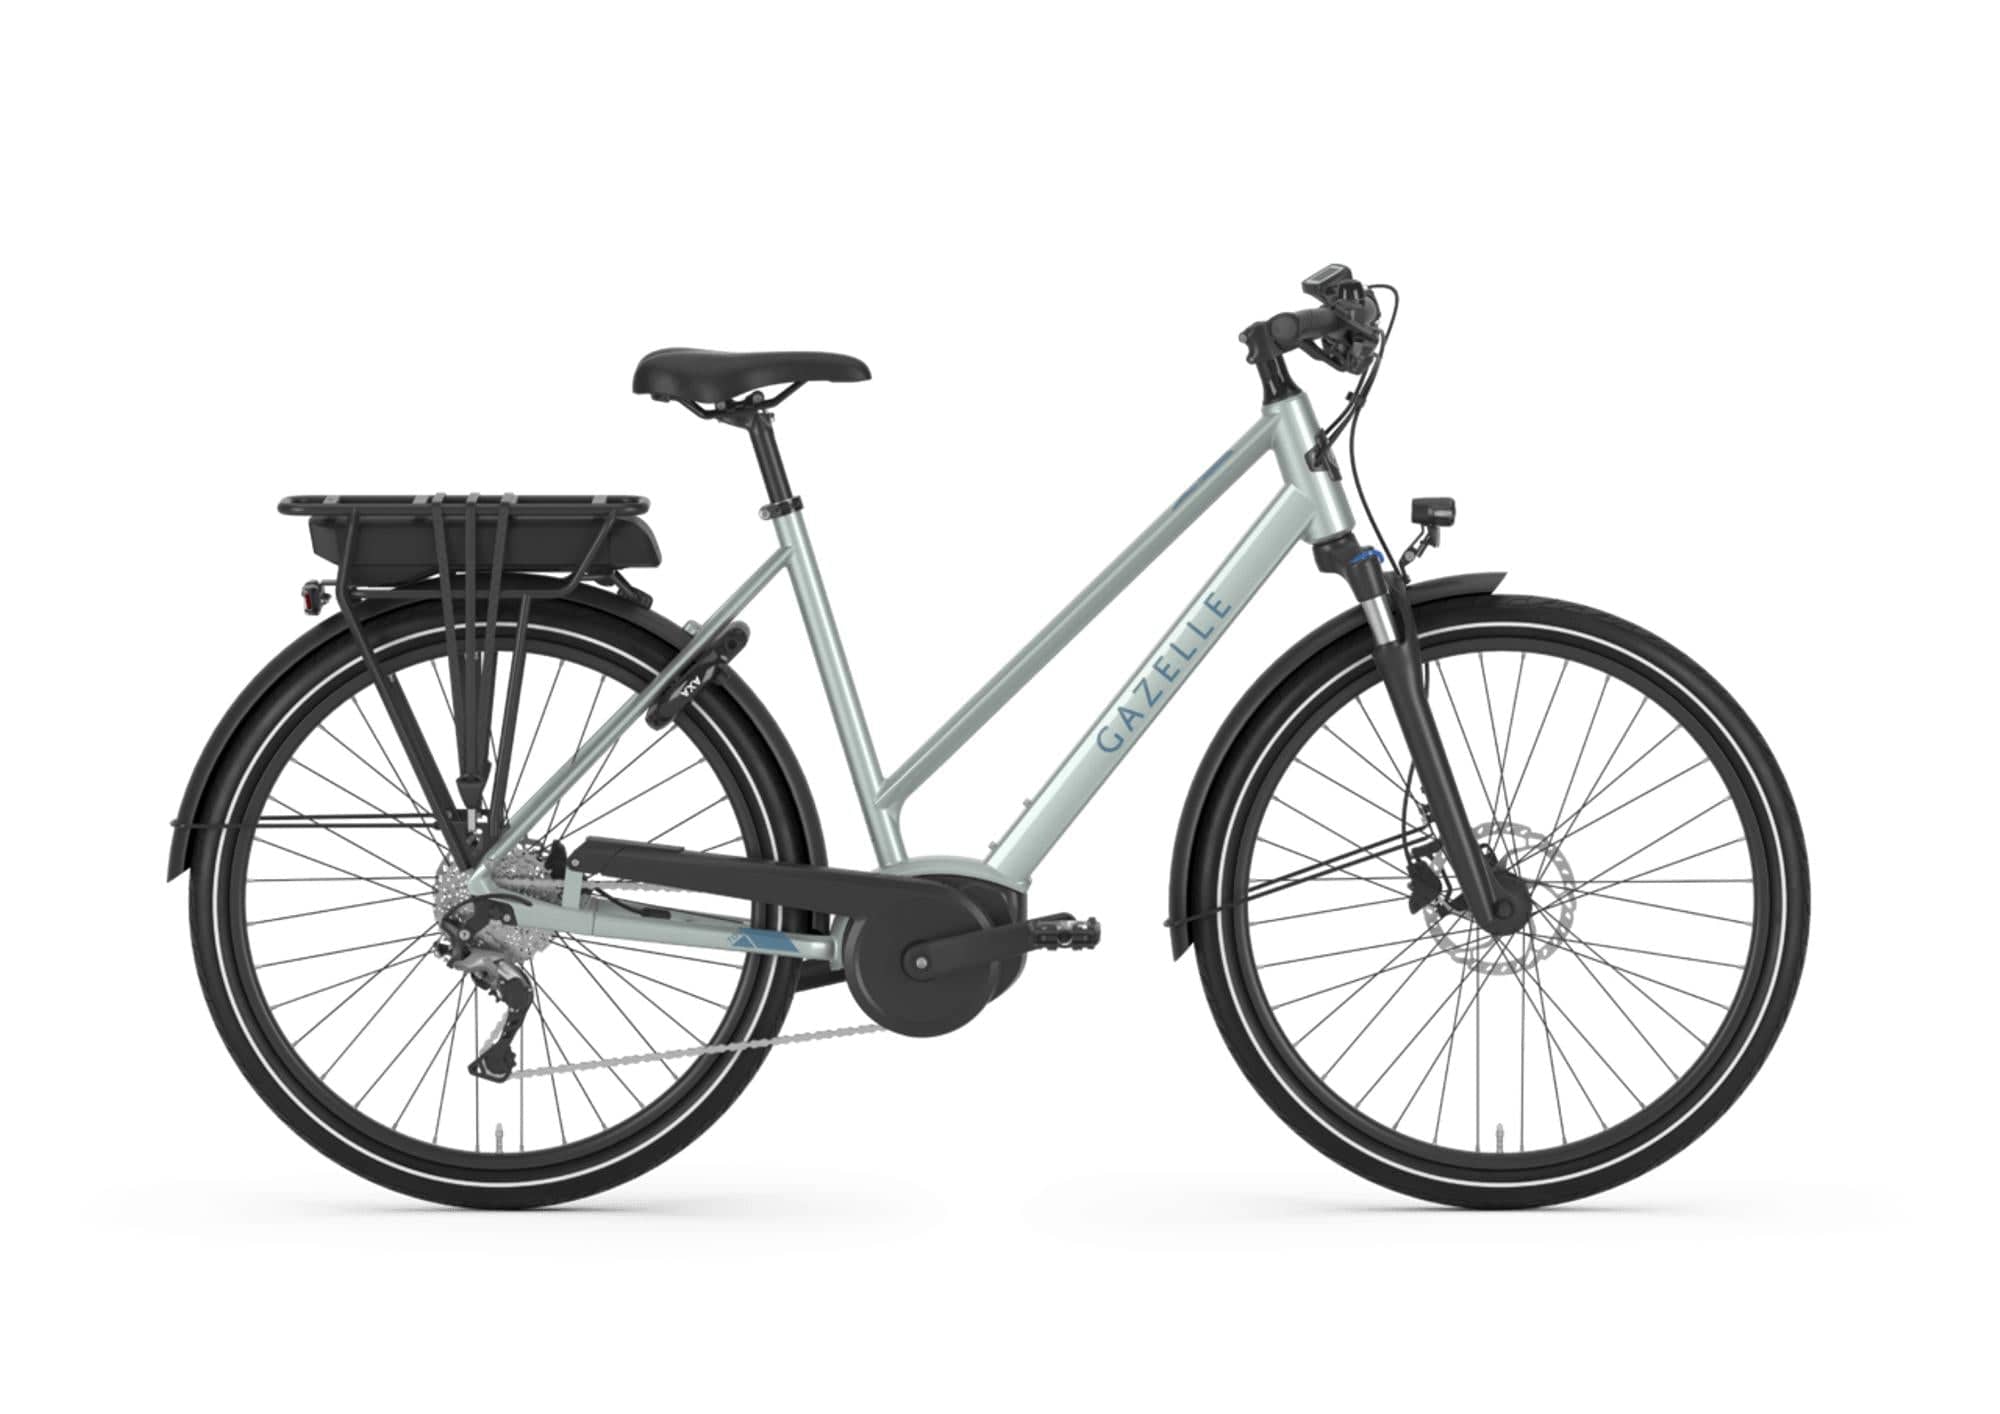 Kanon getrouwd Stadscentrum Gazelle Medeo T9 Low Step eBike for Sale | Fly Rides USA